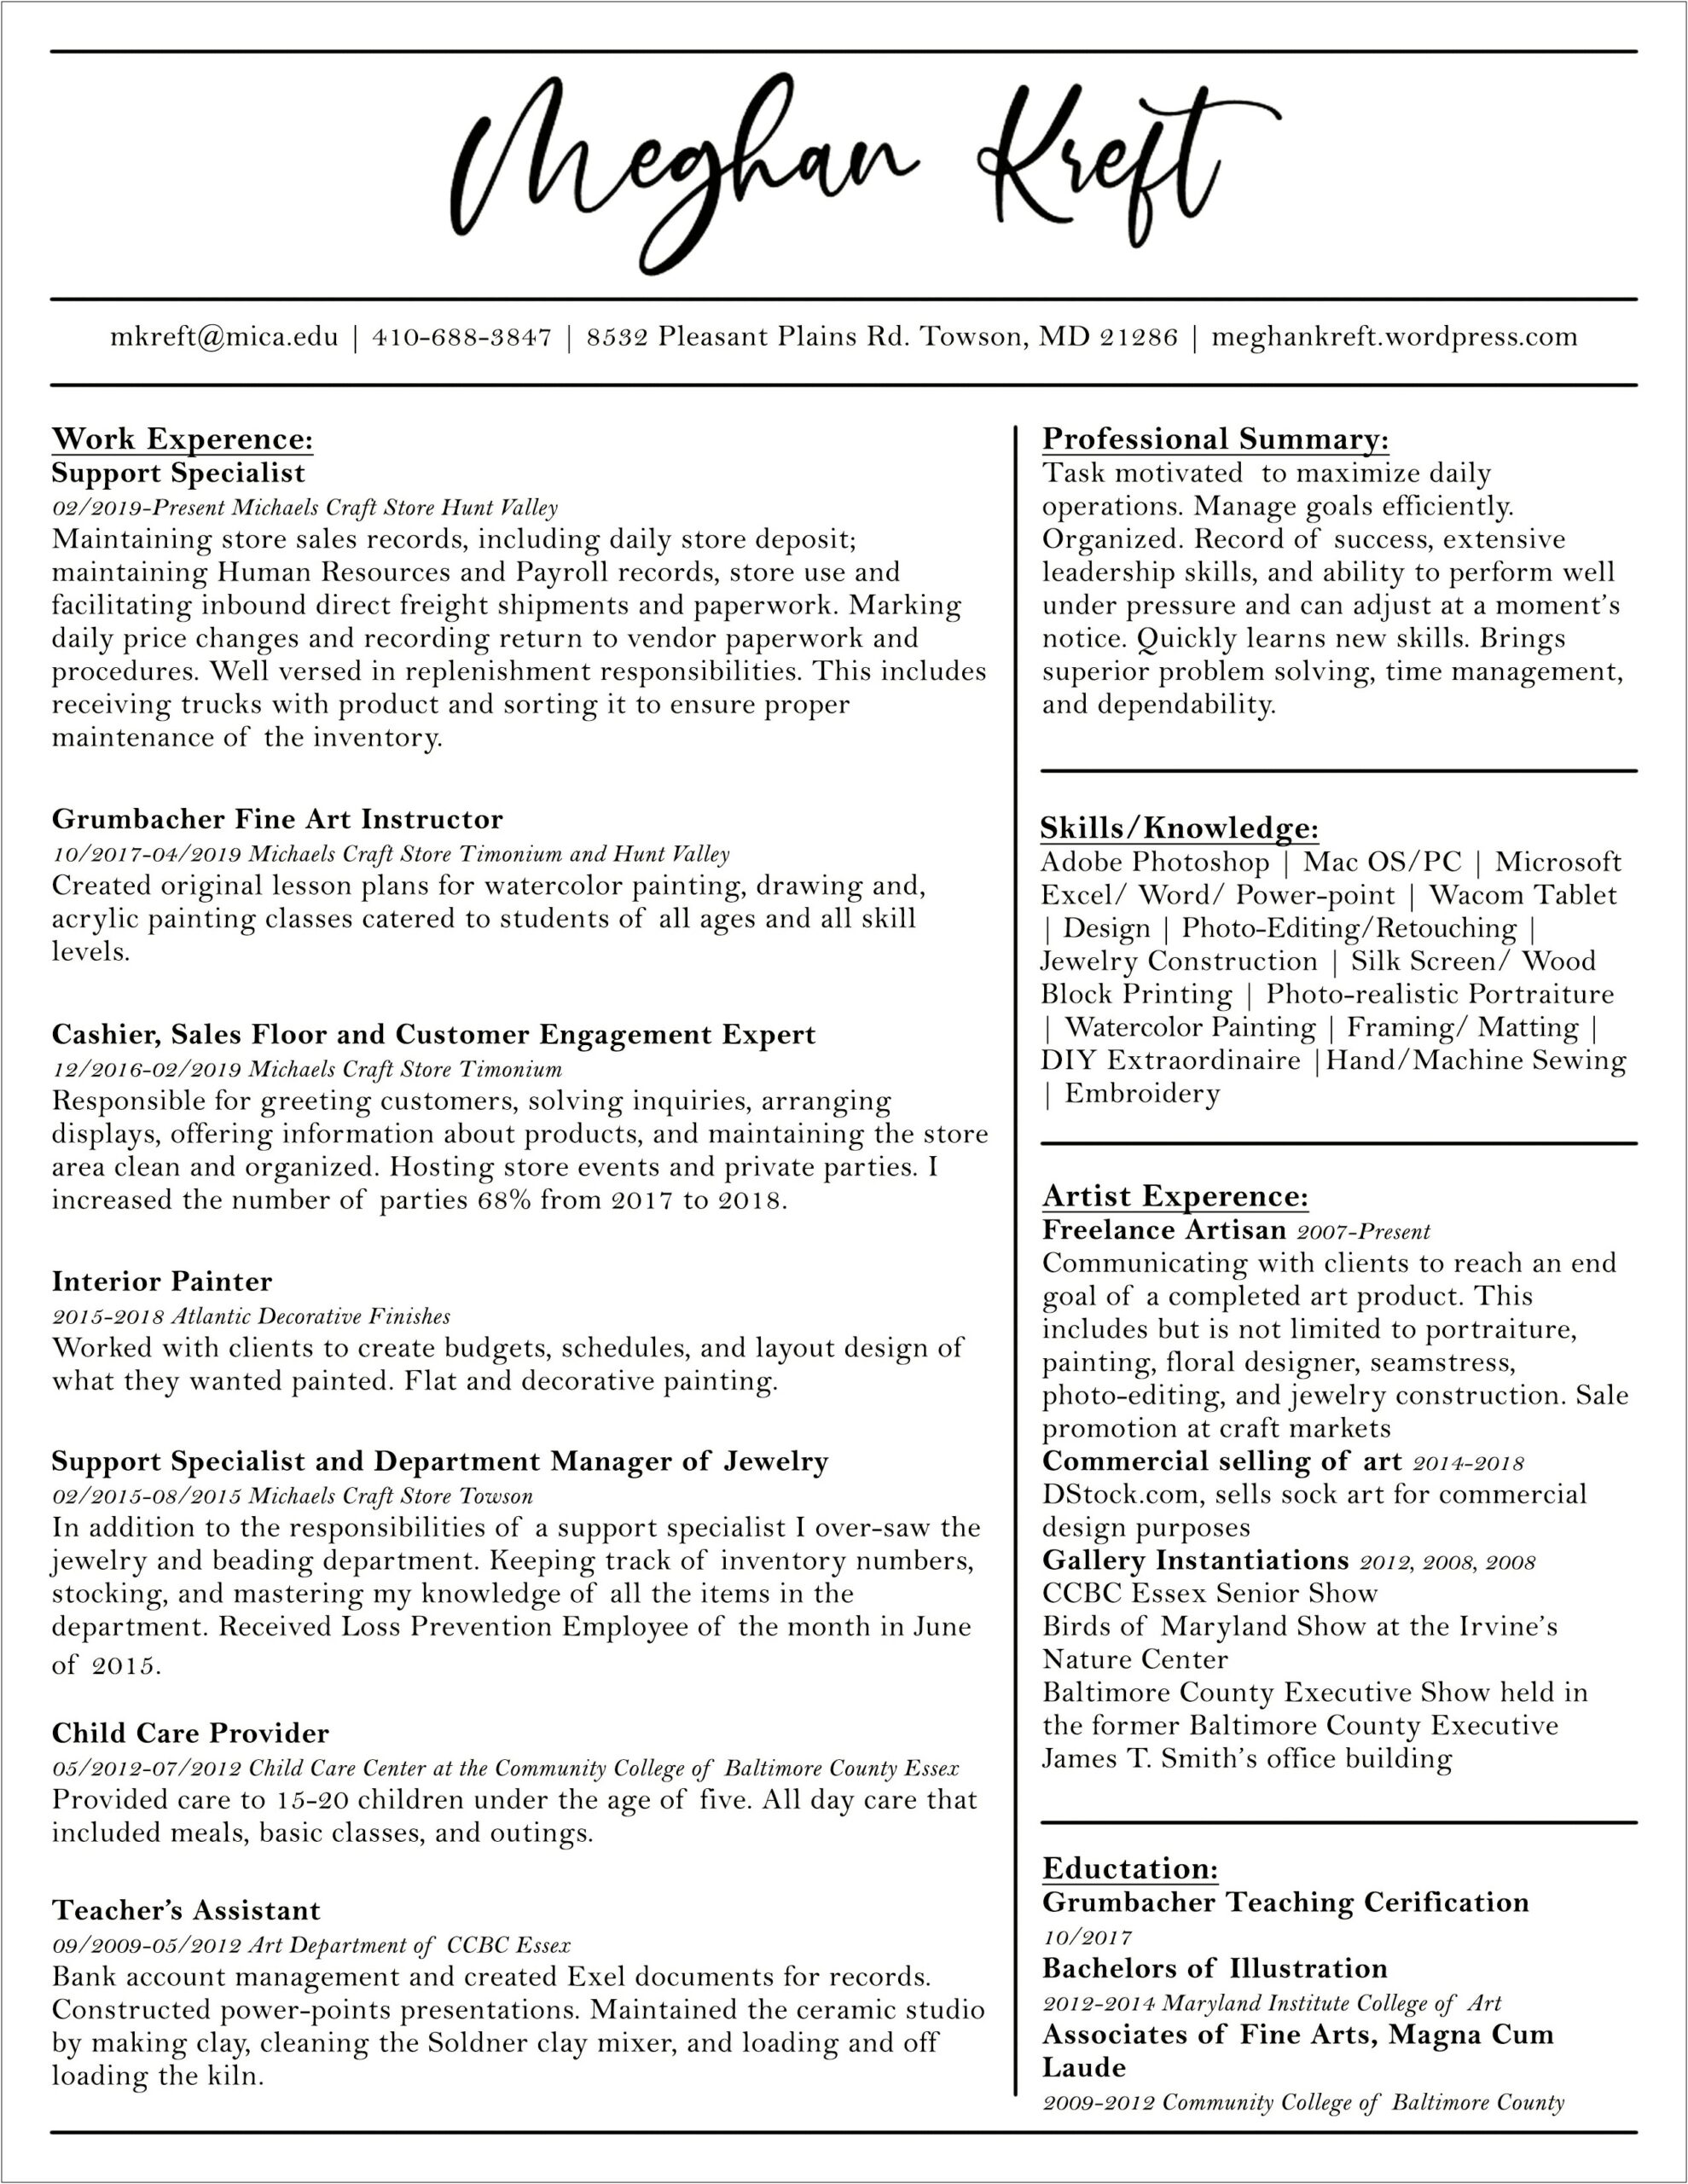 Resume Word For Different Child Age Groups